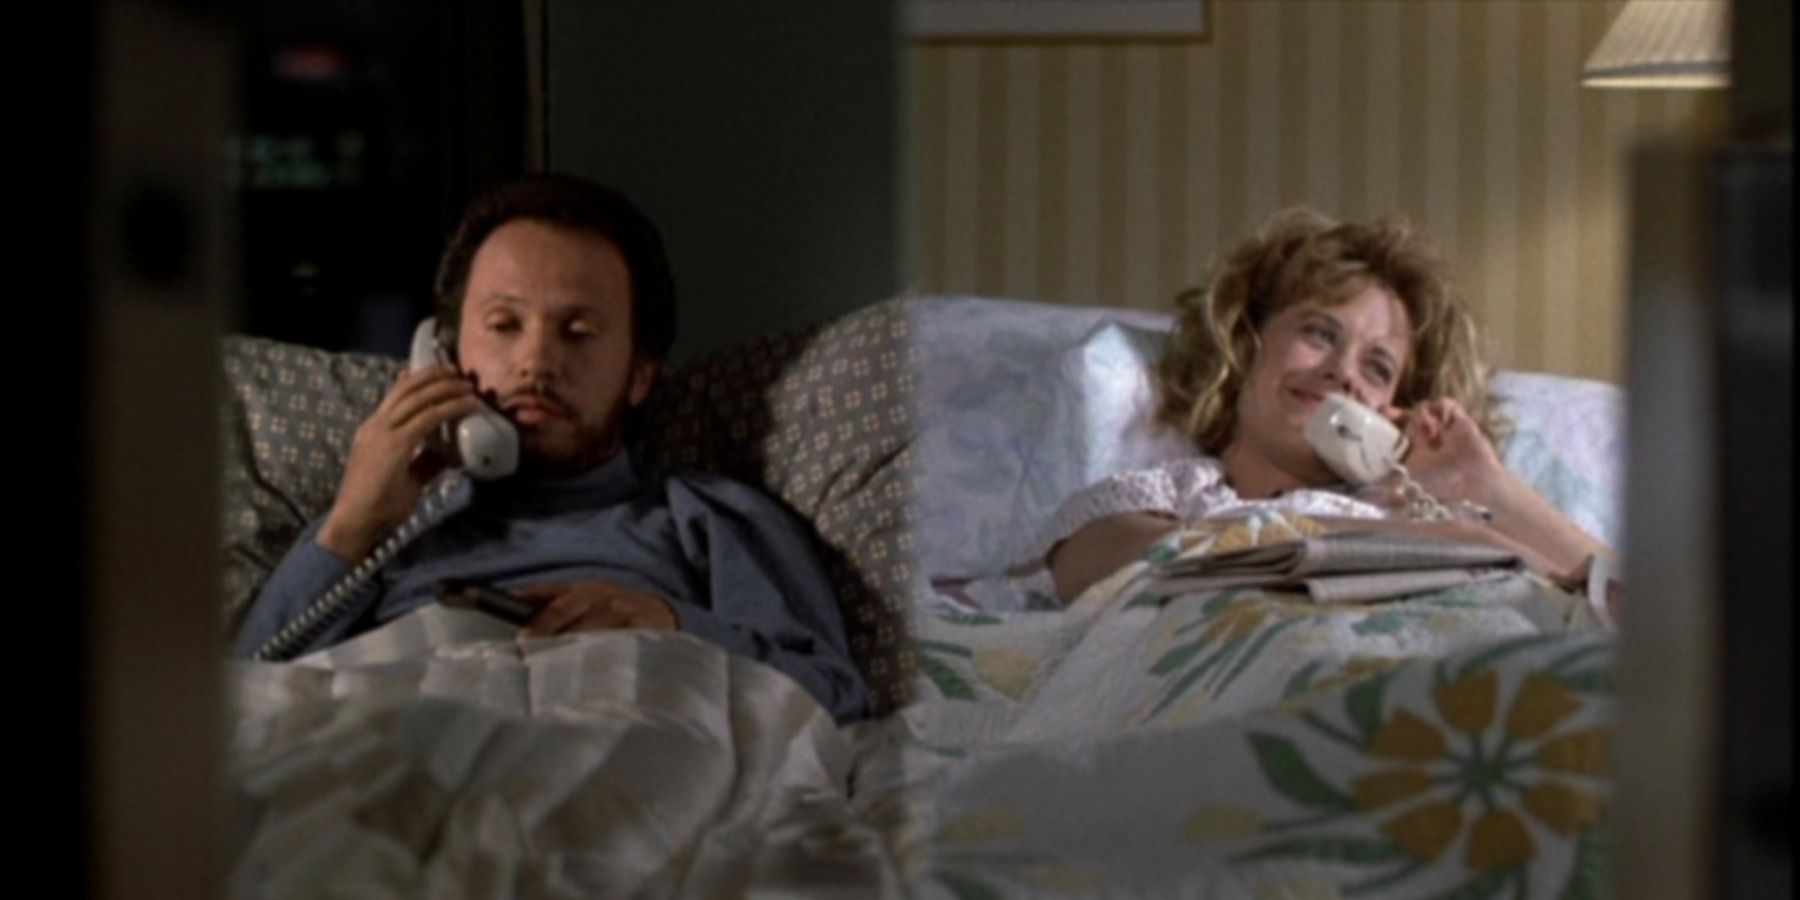 A split screen from the movie features Harry and Sally in bed and on the phone with each other in When Harry Met Sally